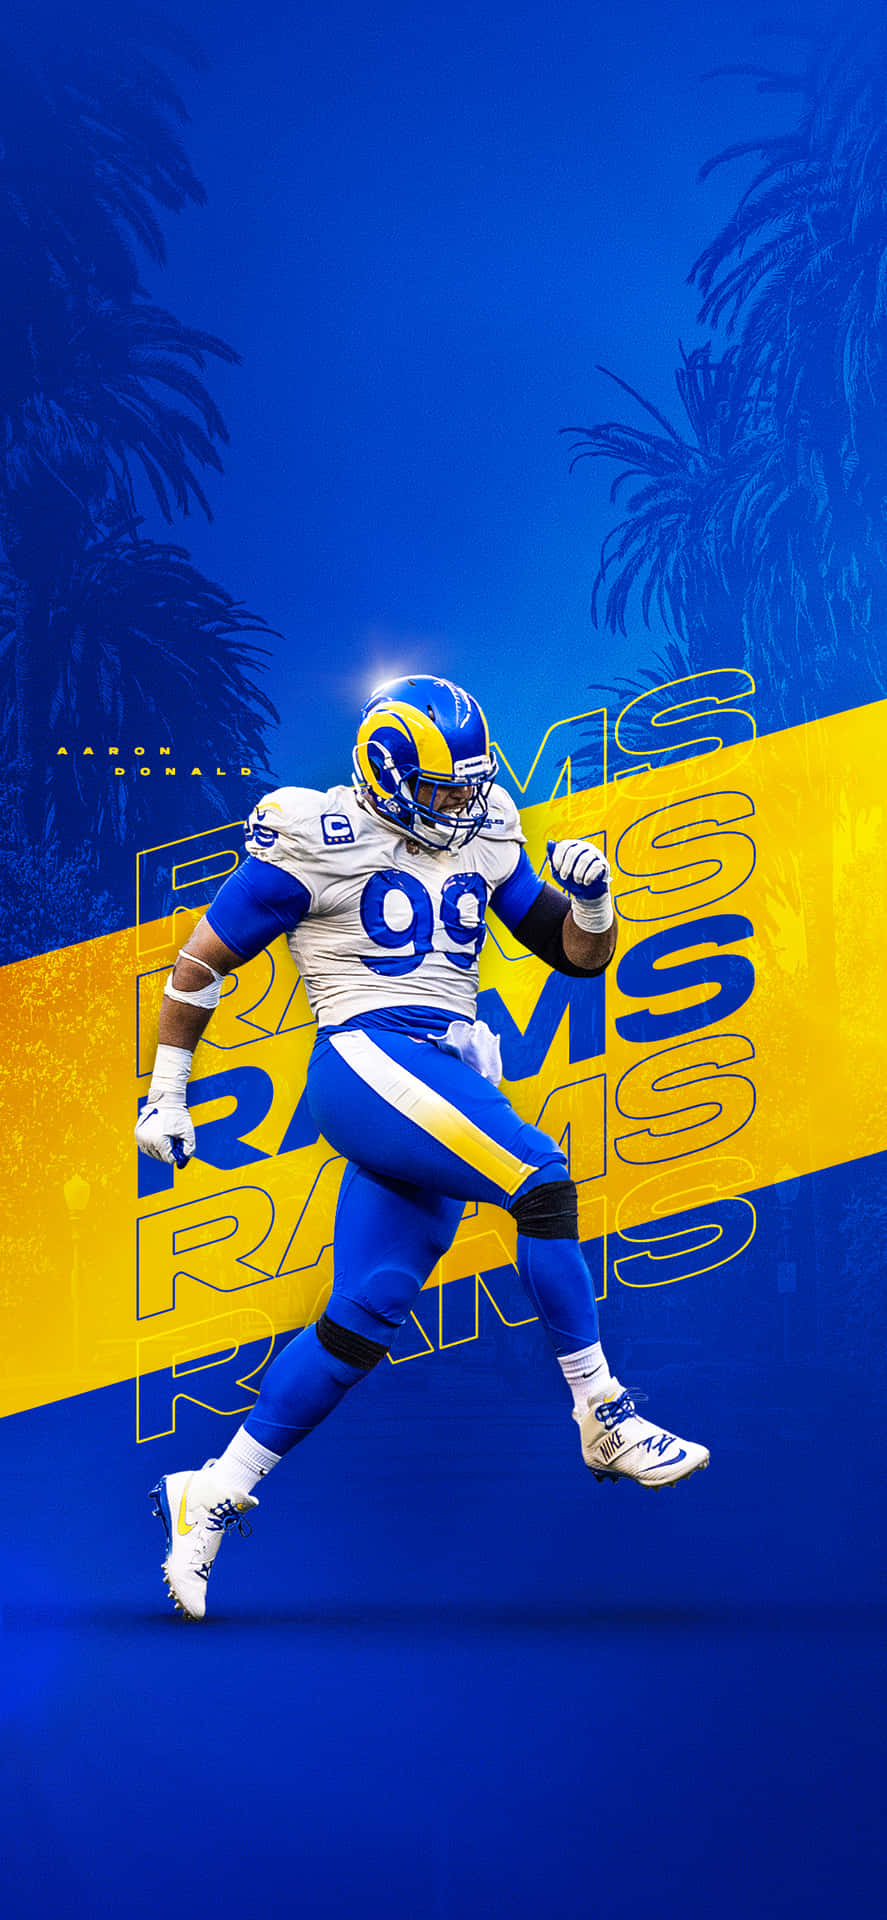 Upgrade to the new and improved Rams Phone Wallpaper